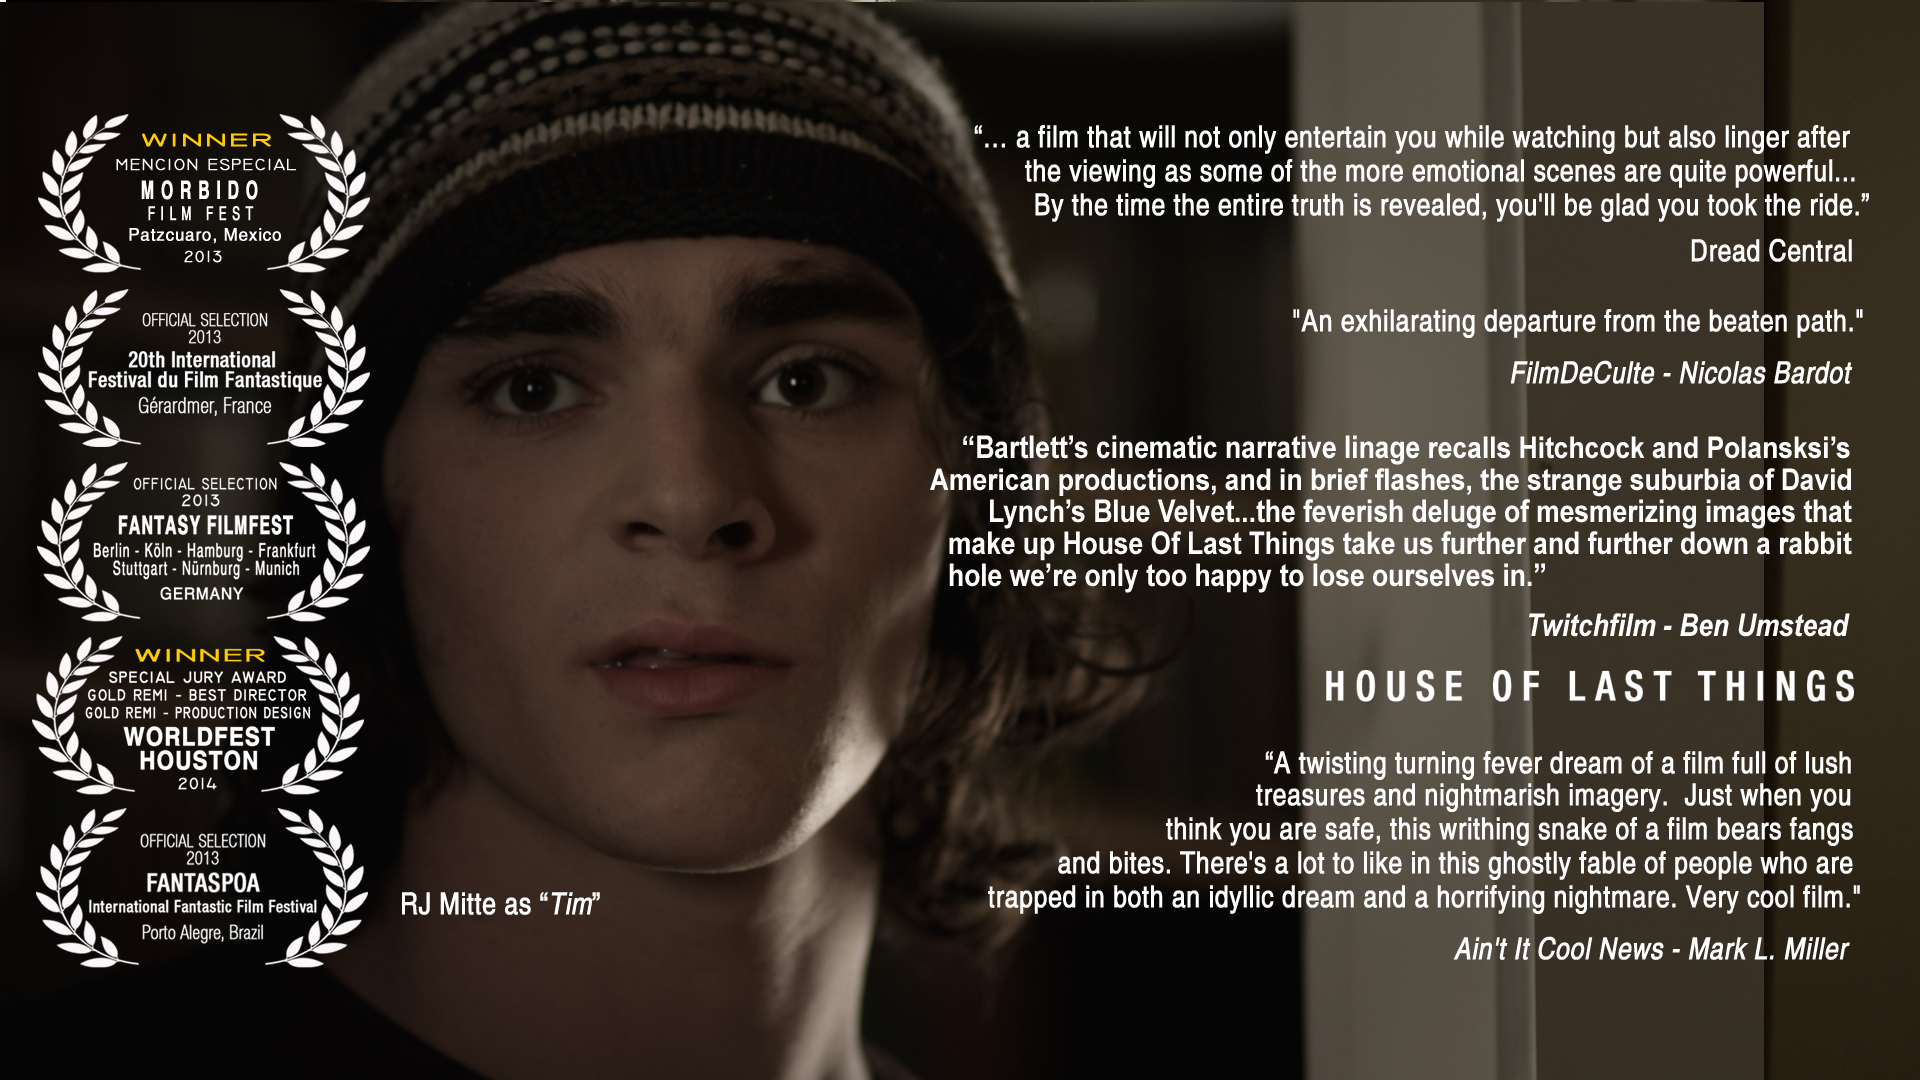 Tim senses something is wrong with the house. Played by RJ Mitte, (Walter White Jr. in Breaking Bad).